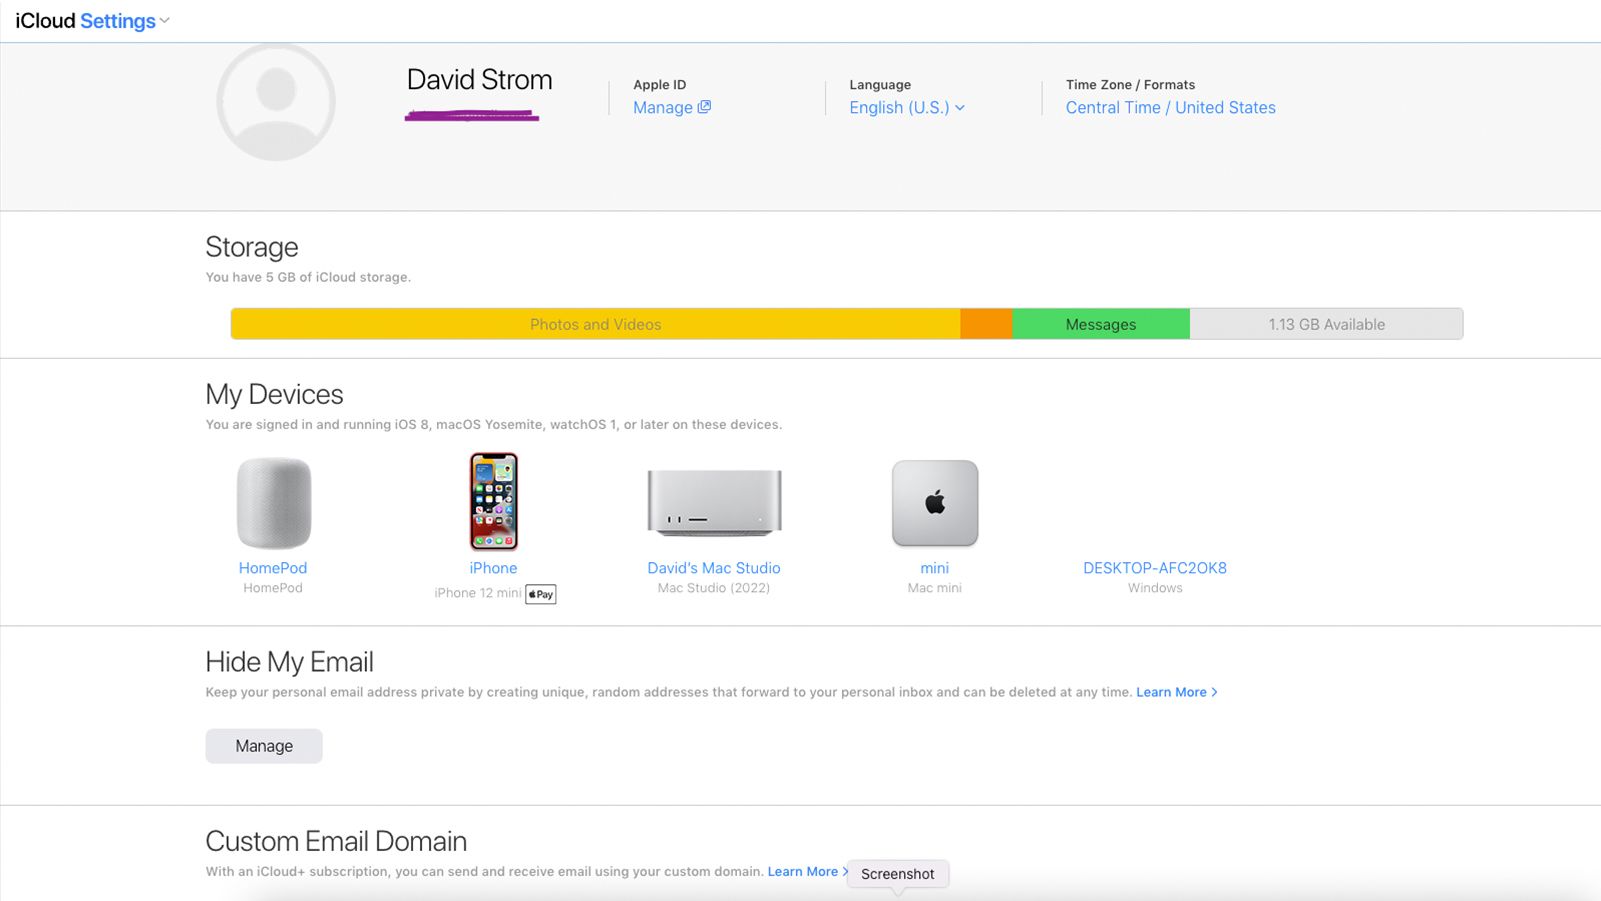 Apple's iCloud web view shows how much storage you have consumed with your various applications, what devices are sharing your storage repository and other paid features such as Hide My Email and custom email domains that you can set up.